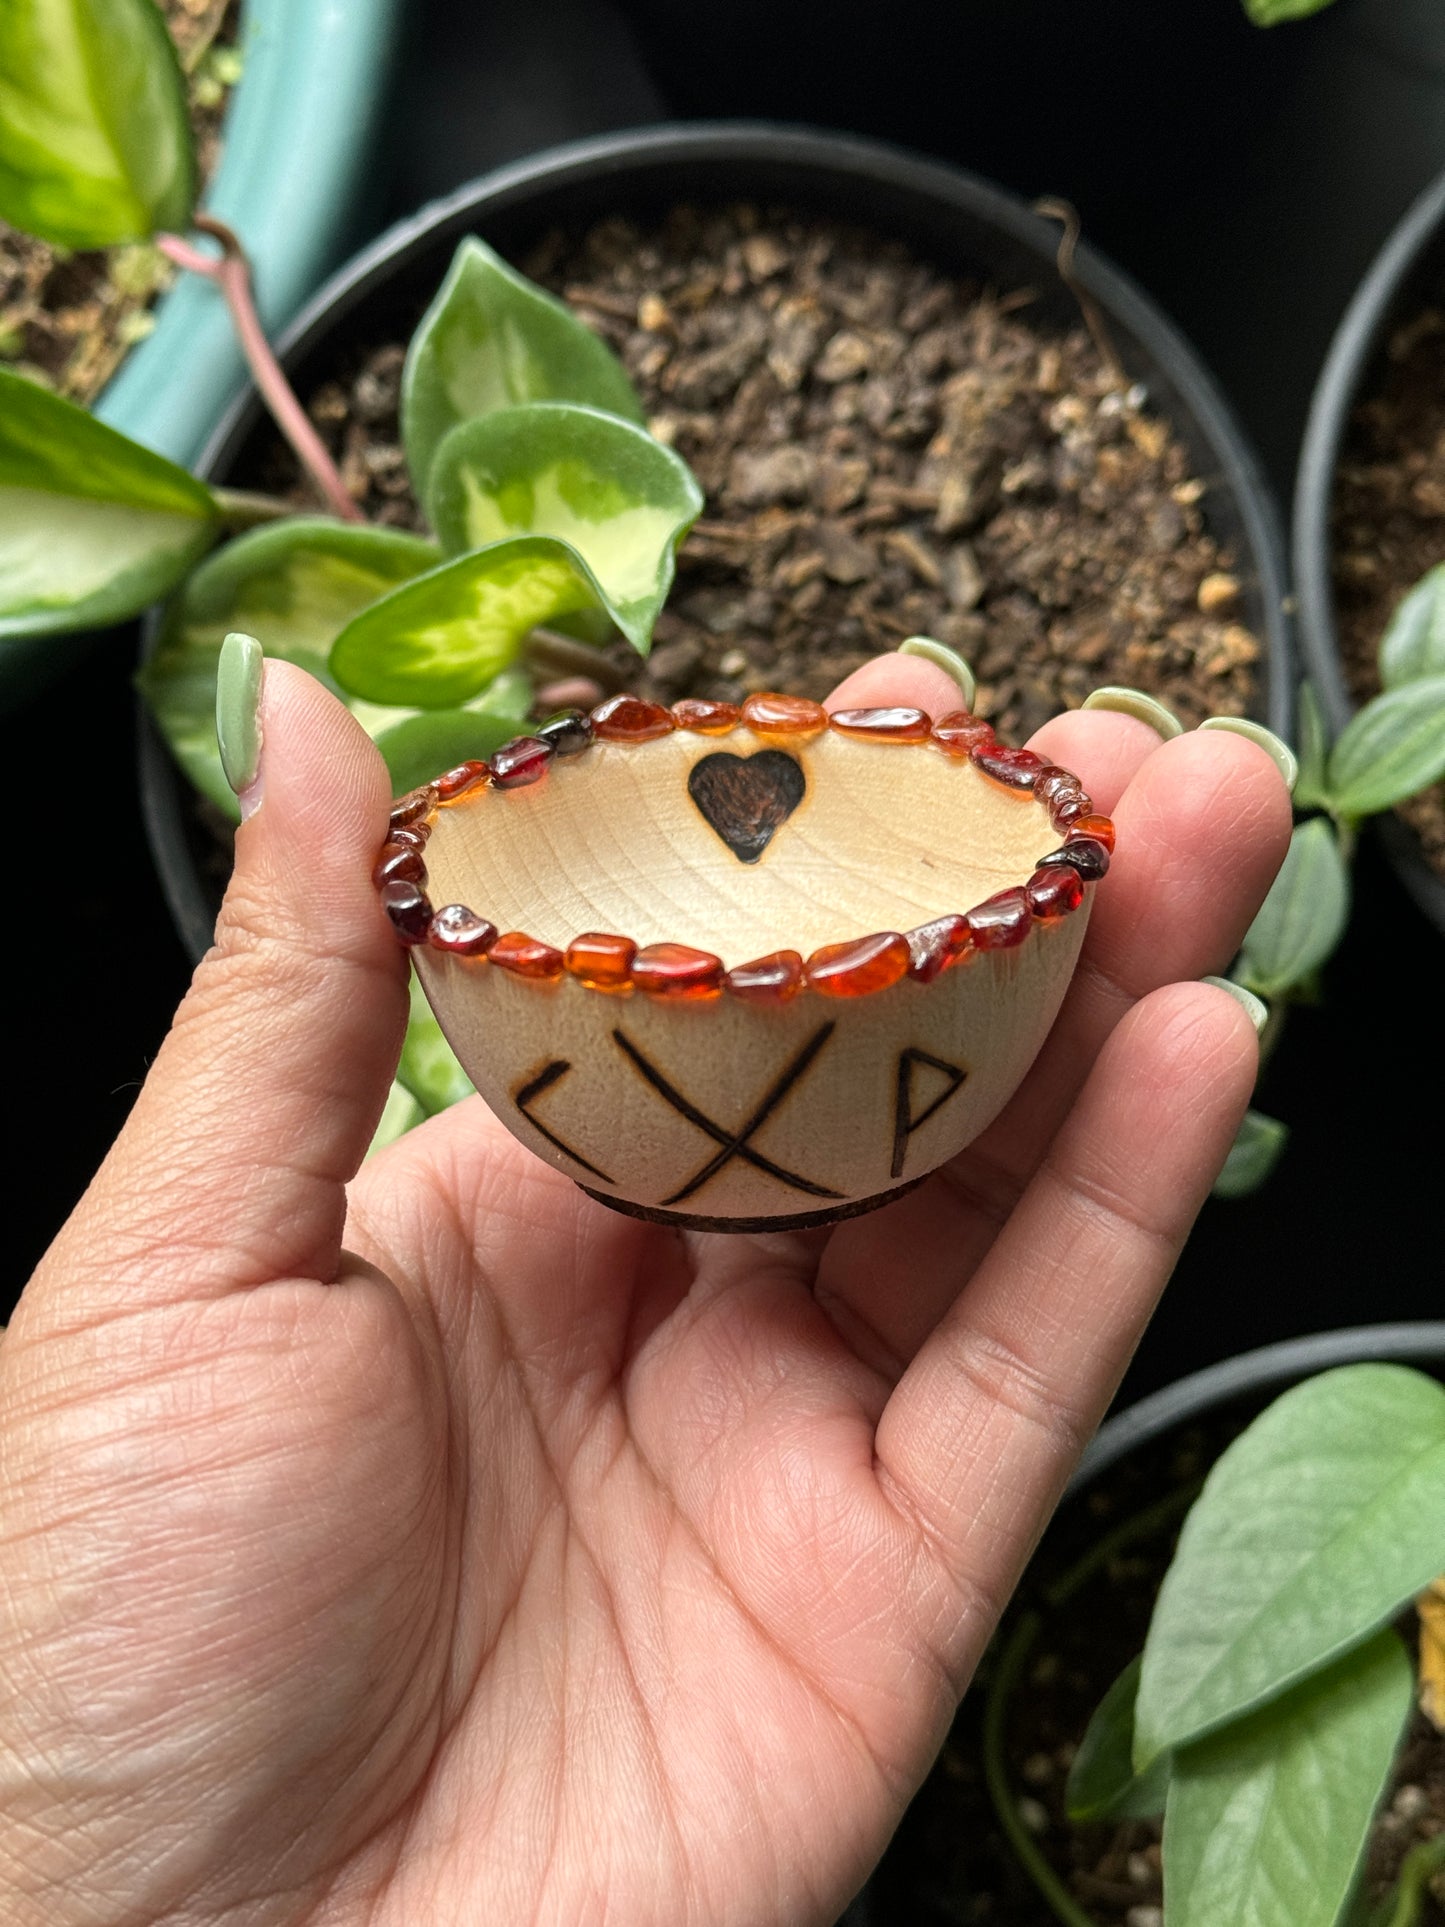 Fires of Passion Hand Burned Mini Wooden Altar Bowl